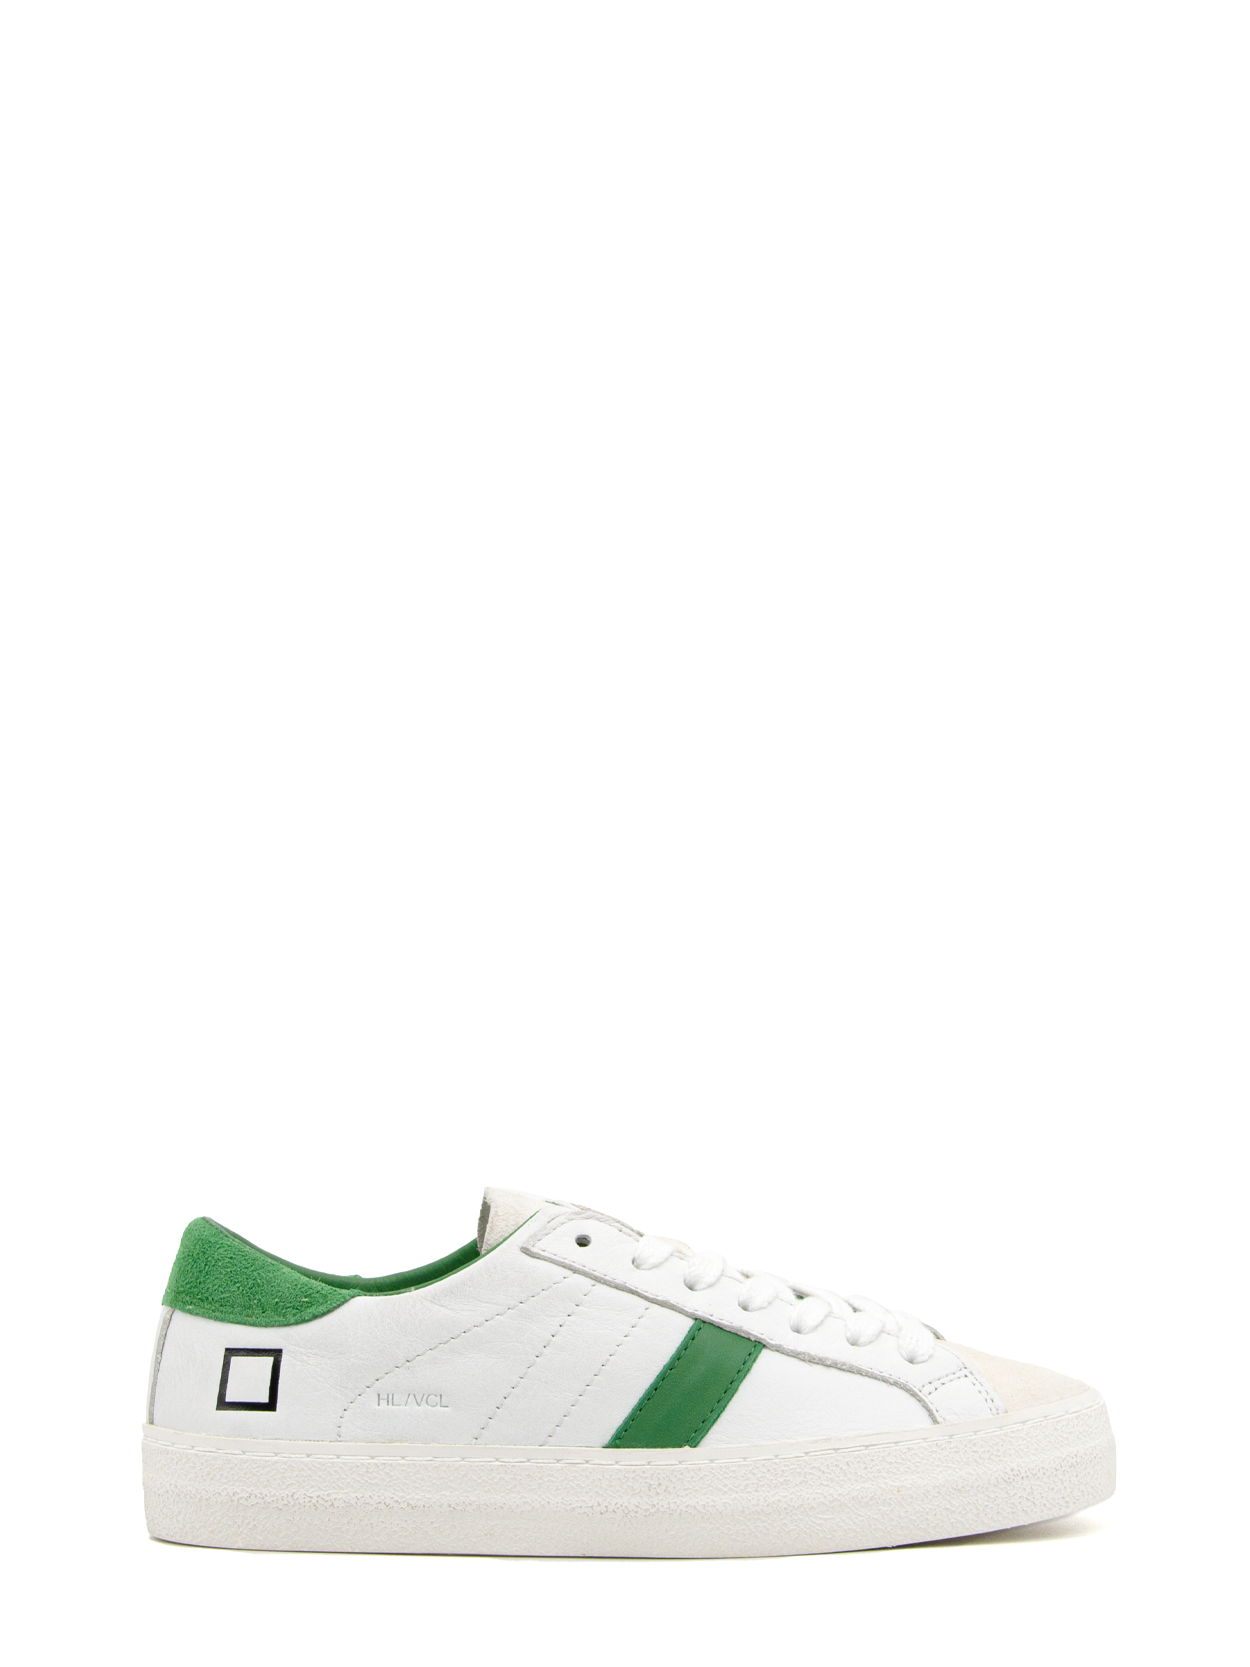 D.A.T.E. HL-VD-WG HILL LOW VINTAGE COLORED WHITE-GREEN